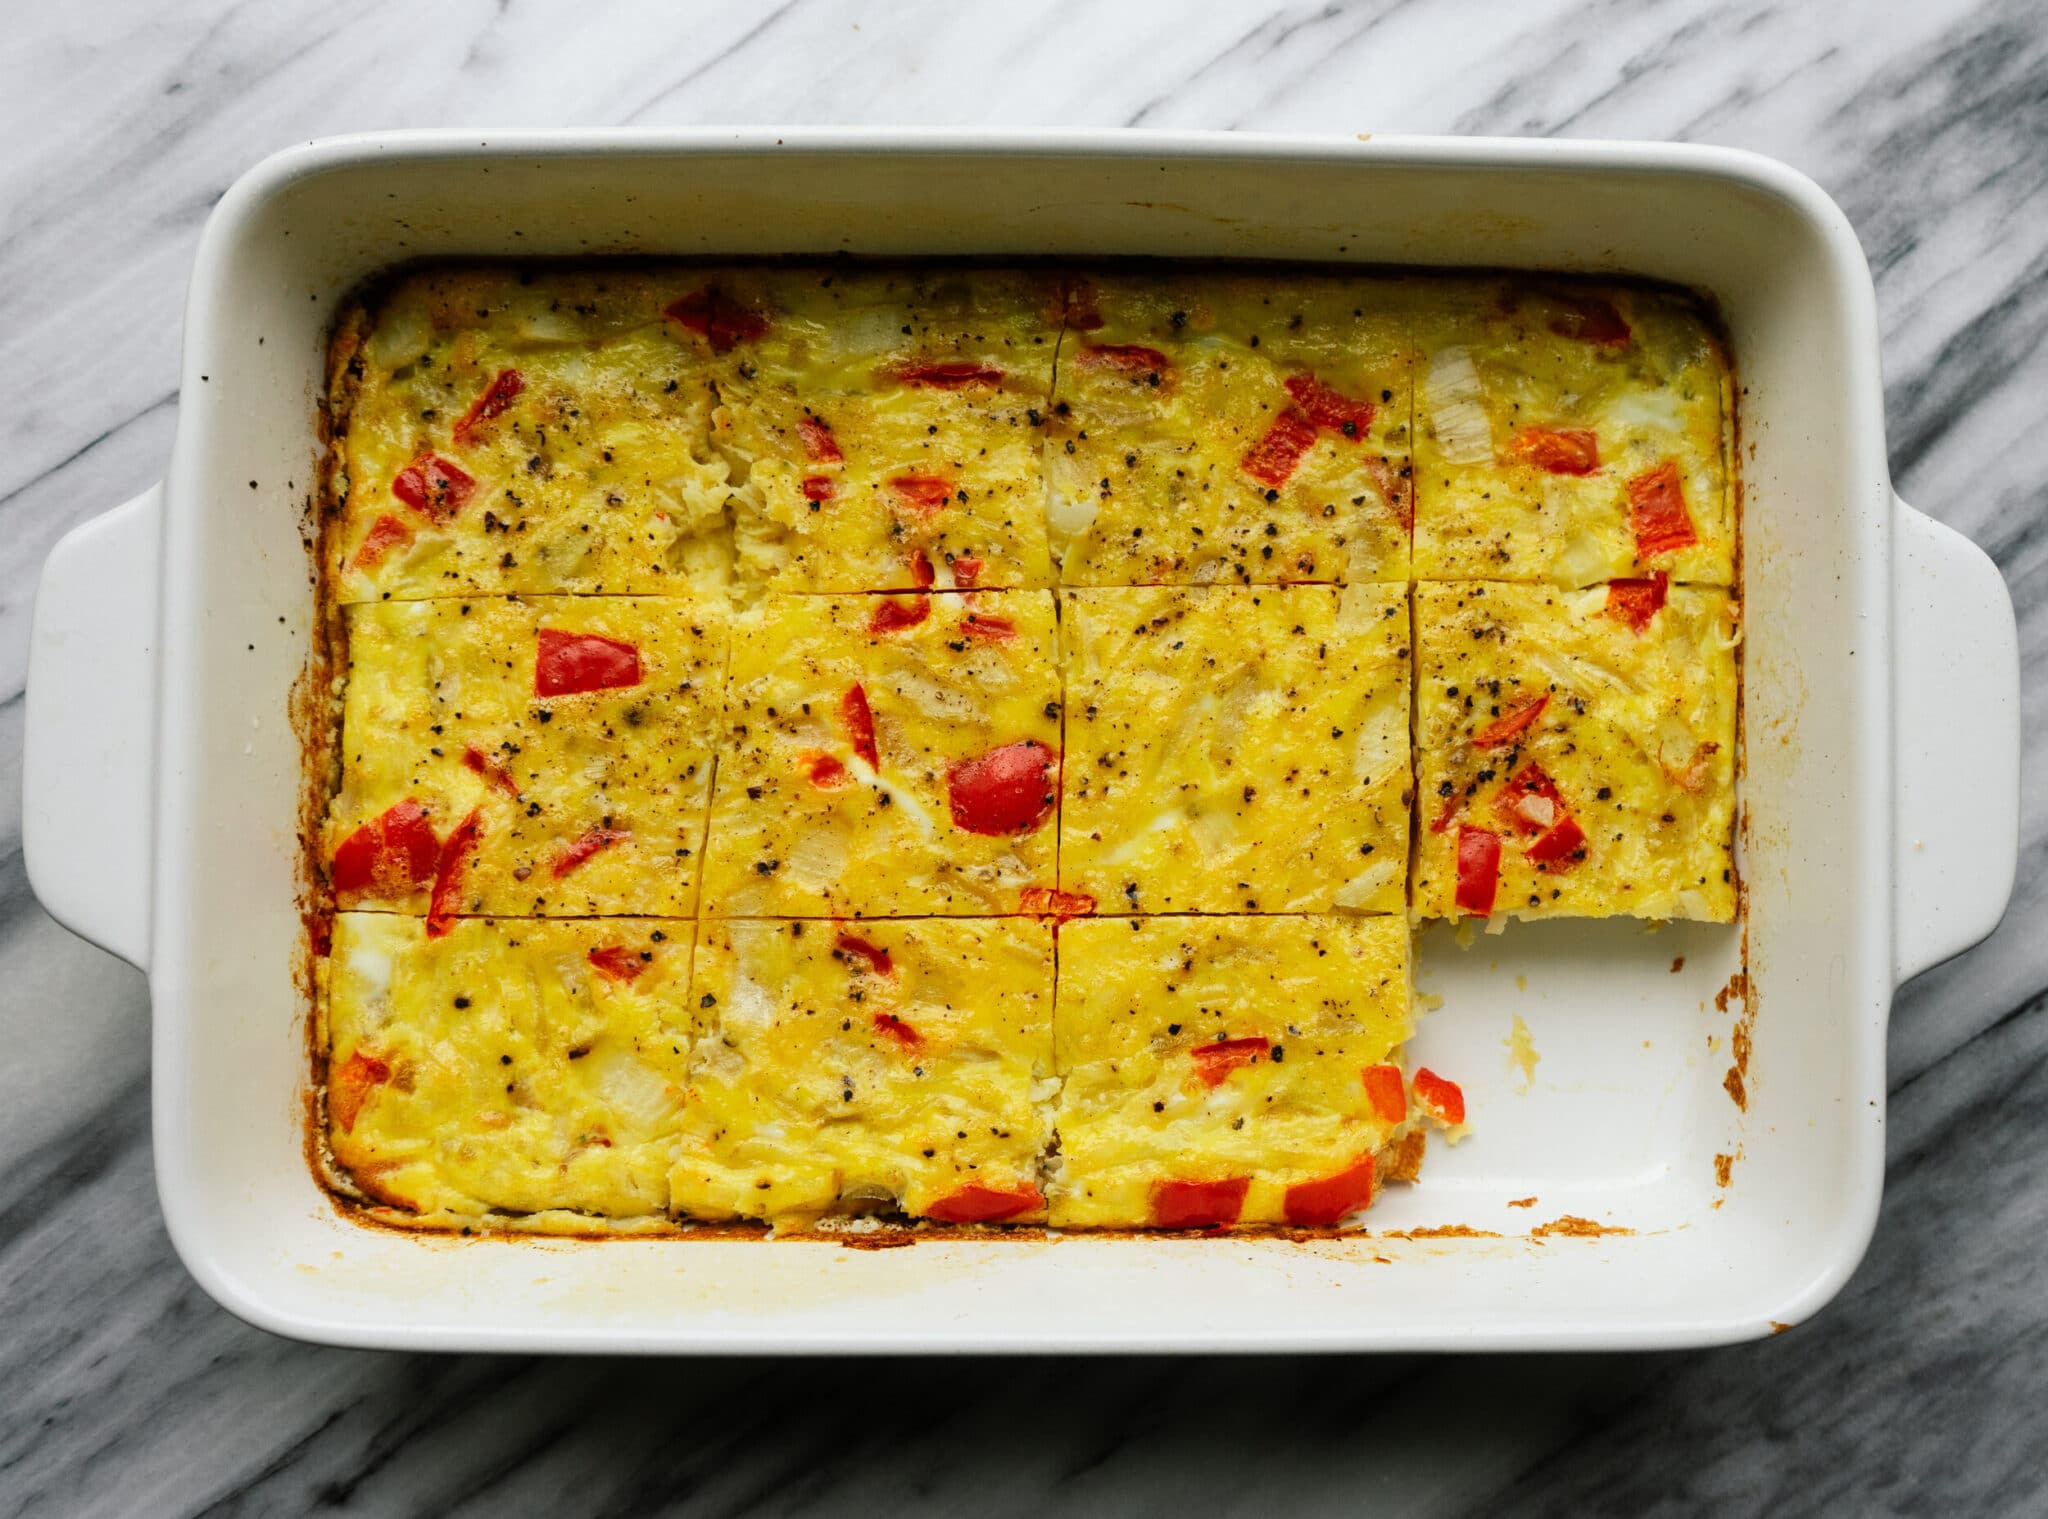 Above view of breakfast casserole with hashbrowns in a baking dish